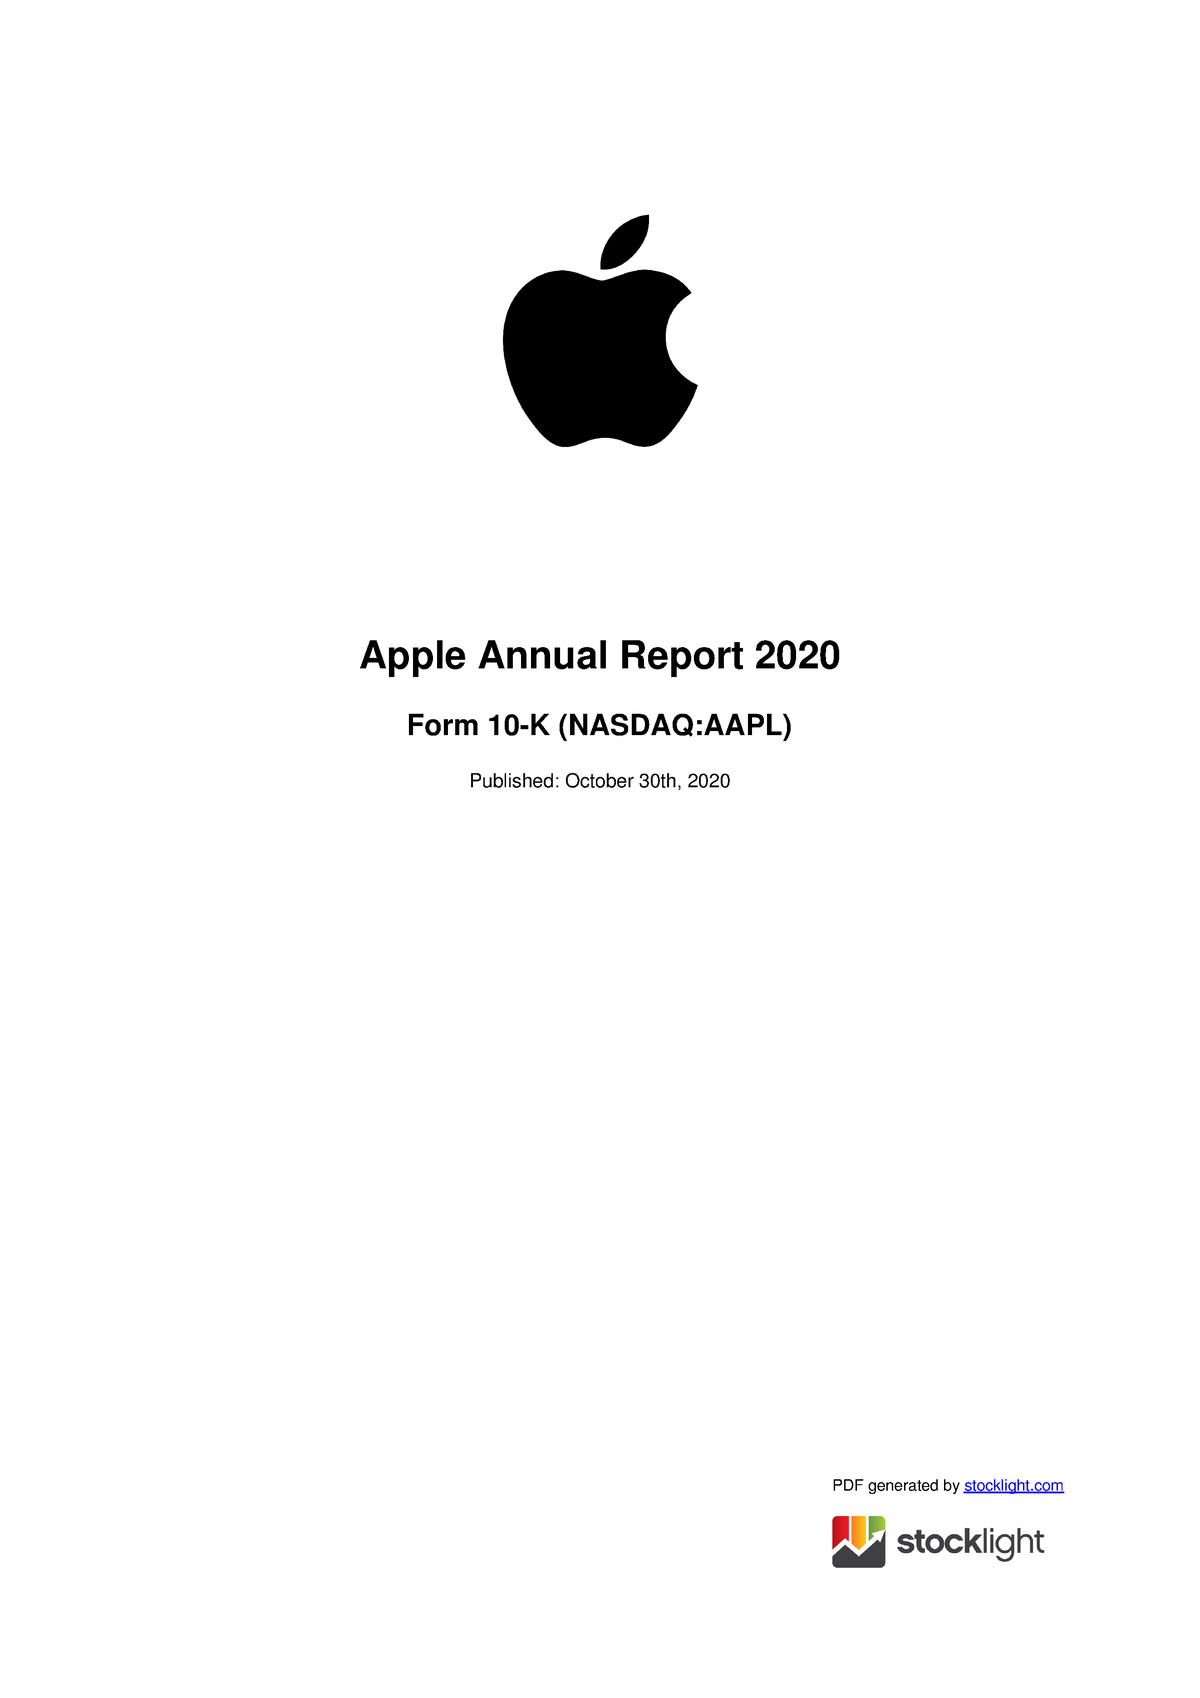 apple research report